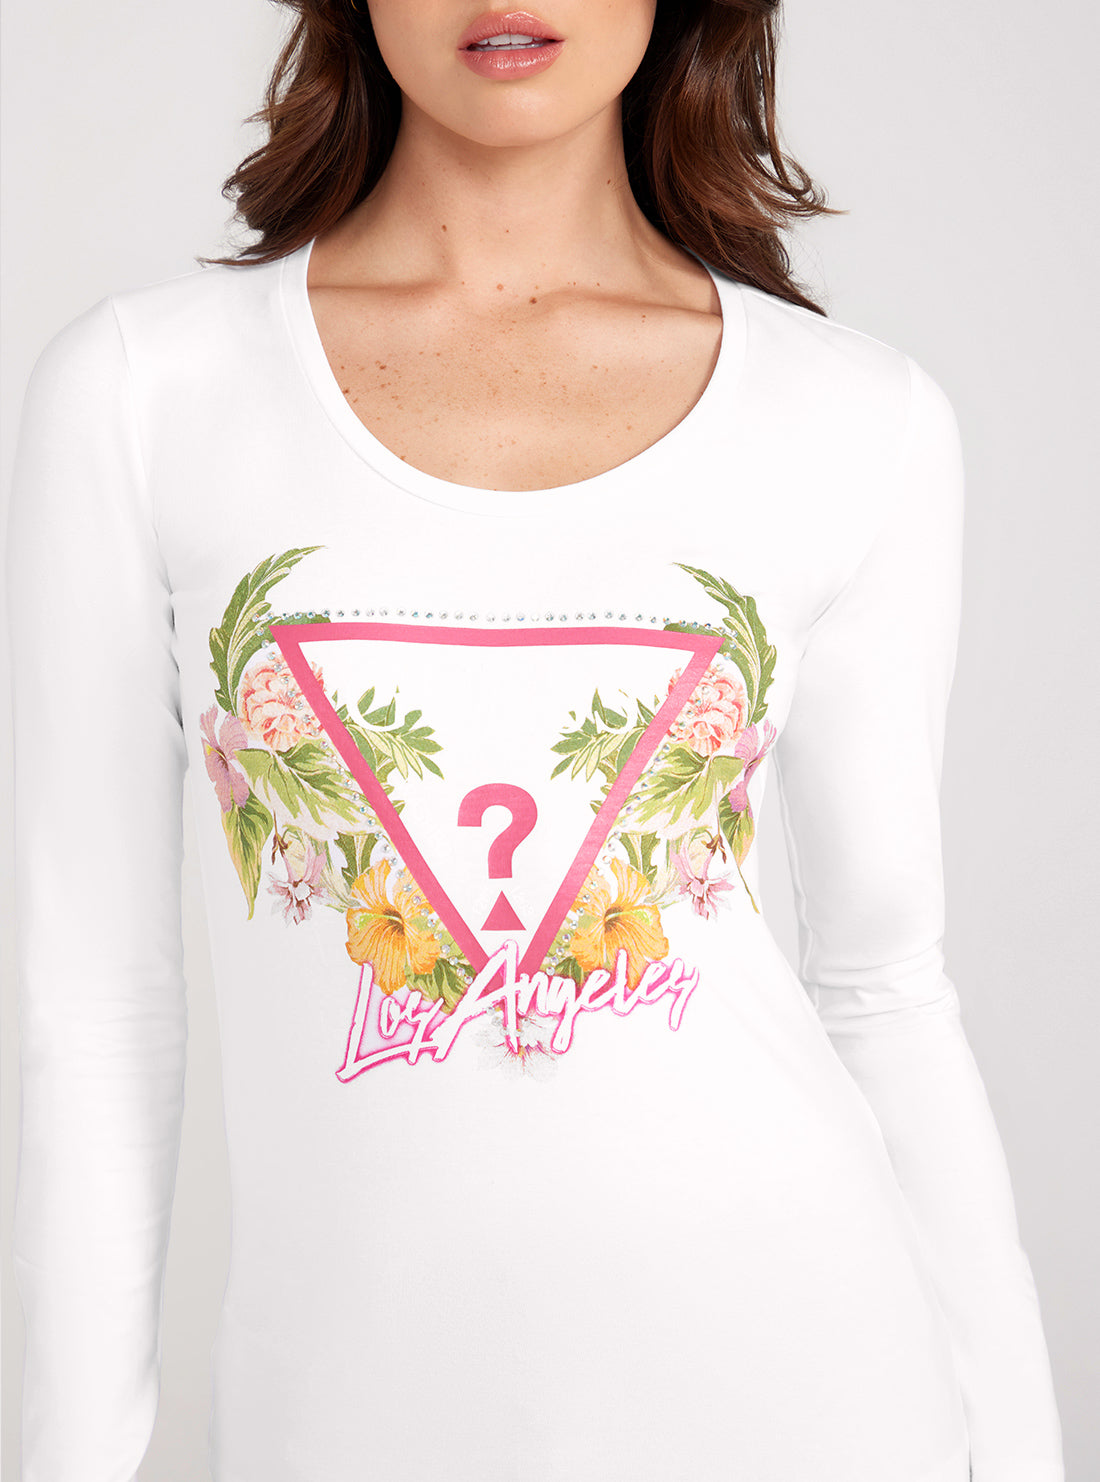 GUESS White Long Sleeve Triangle Flowers T-Shirt detail view